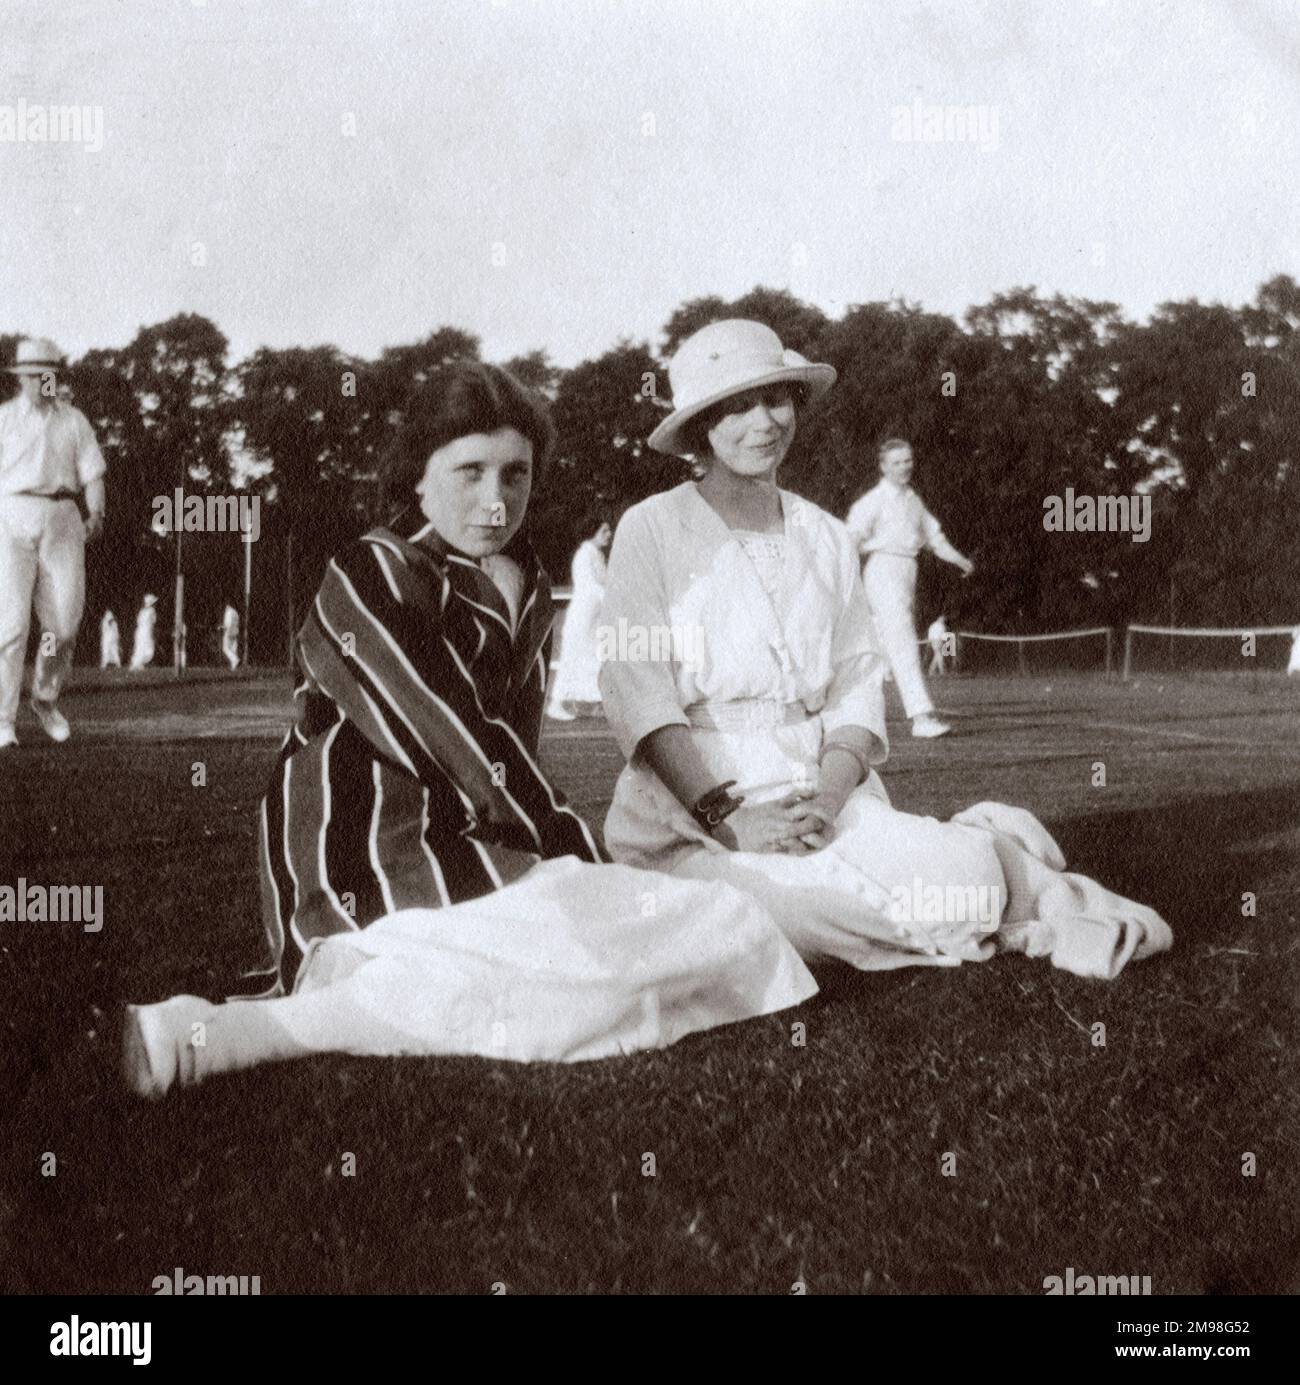 Two young women (Dorothy and Madge Hay) at Hanger Hill Tennis Club, Ealing, West London, with people playing tennis in the background. Stock Photo